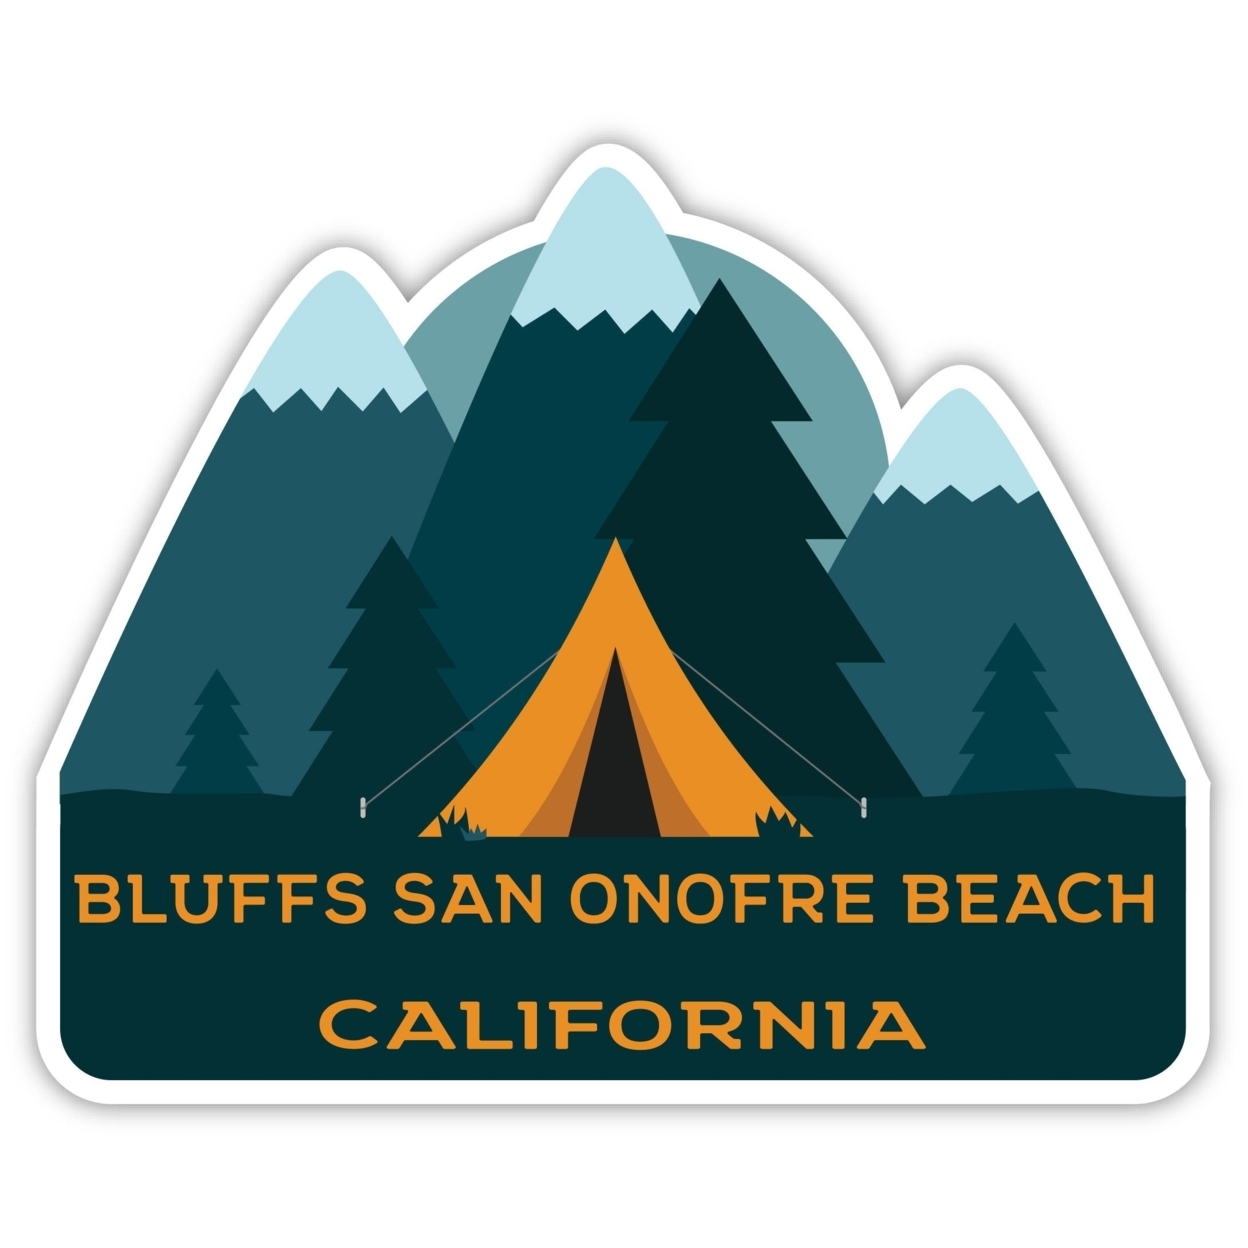 Bluffs San Onofre Beach California Souvenir Decorative Stickers (Choose Theme And Size) - 4-Pack, 4-Inch, Tent